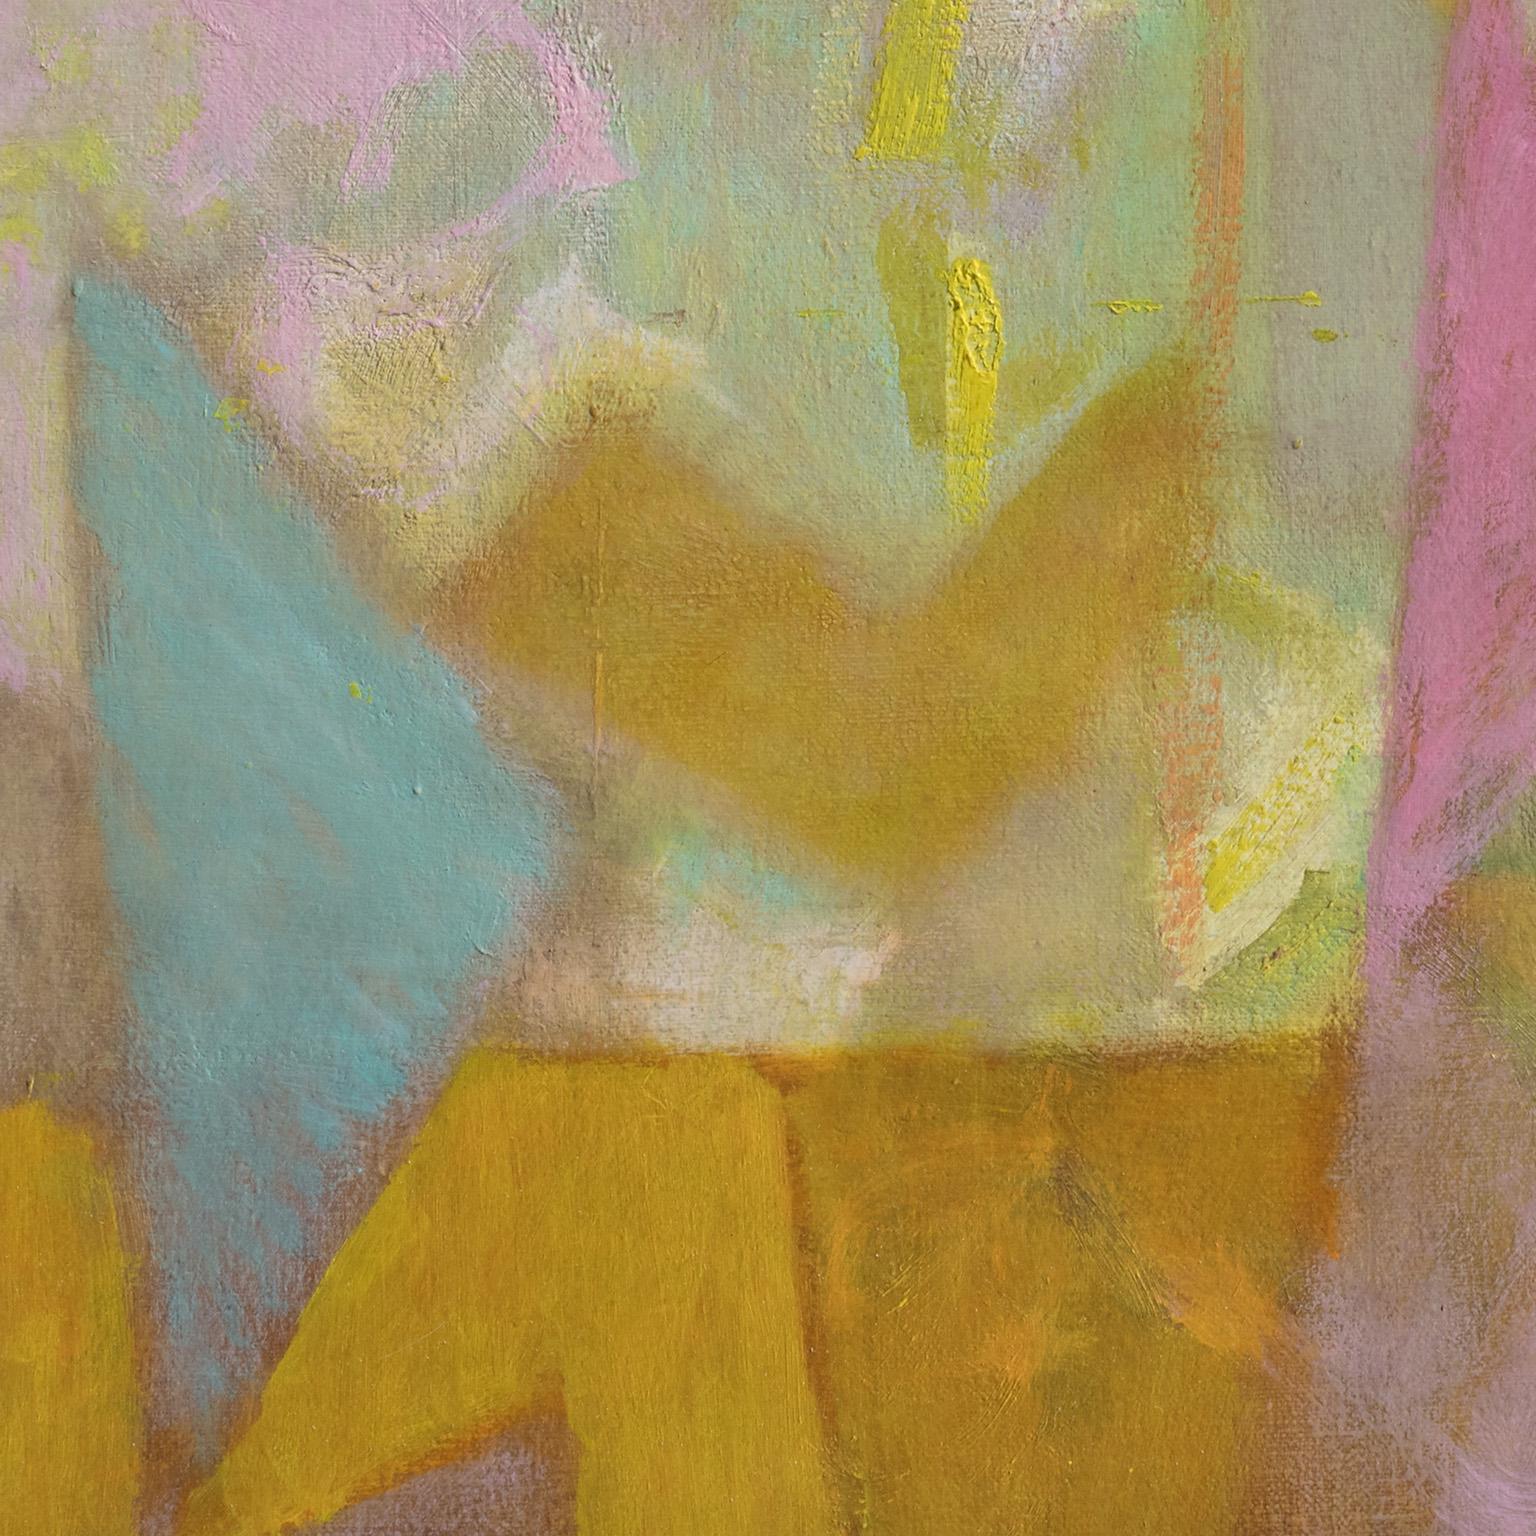 Presagio - Abstract Painting in Pastel Colors: Orange, Pink, Turquoise For Sale 3